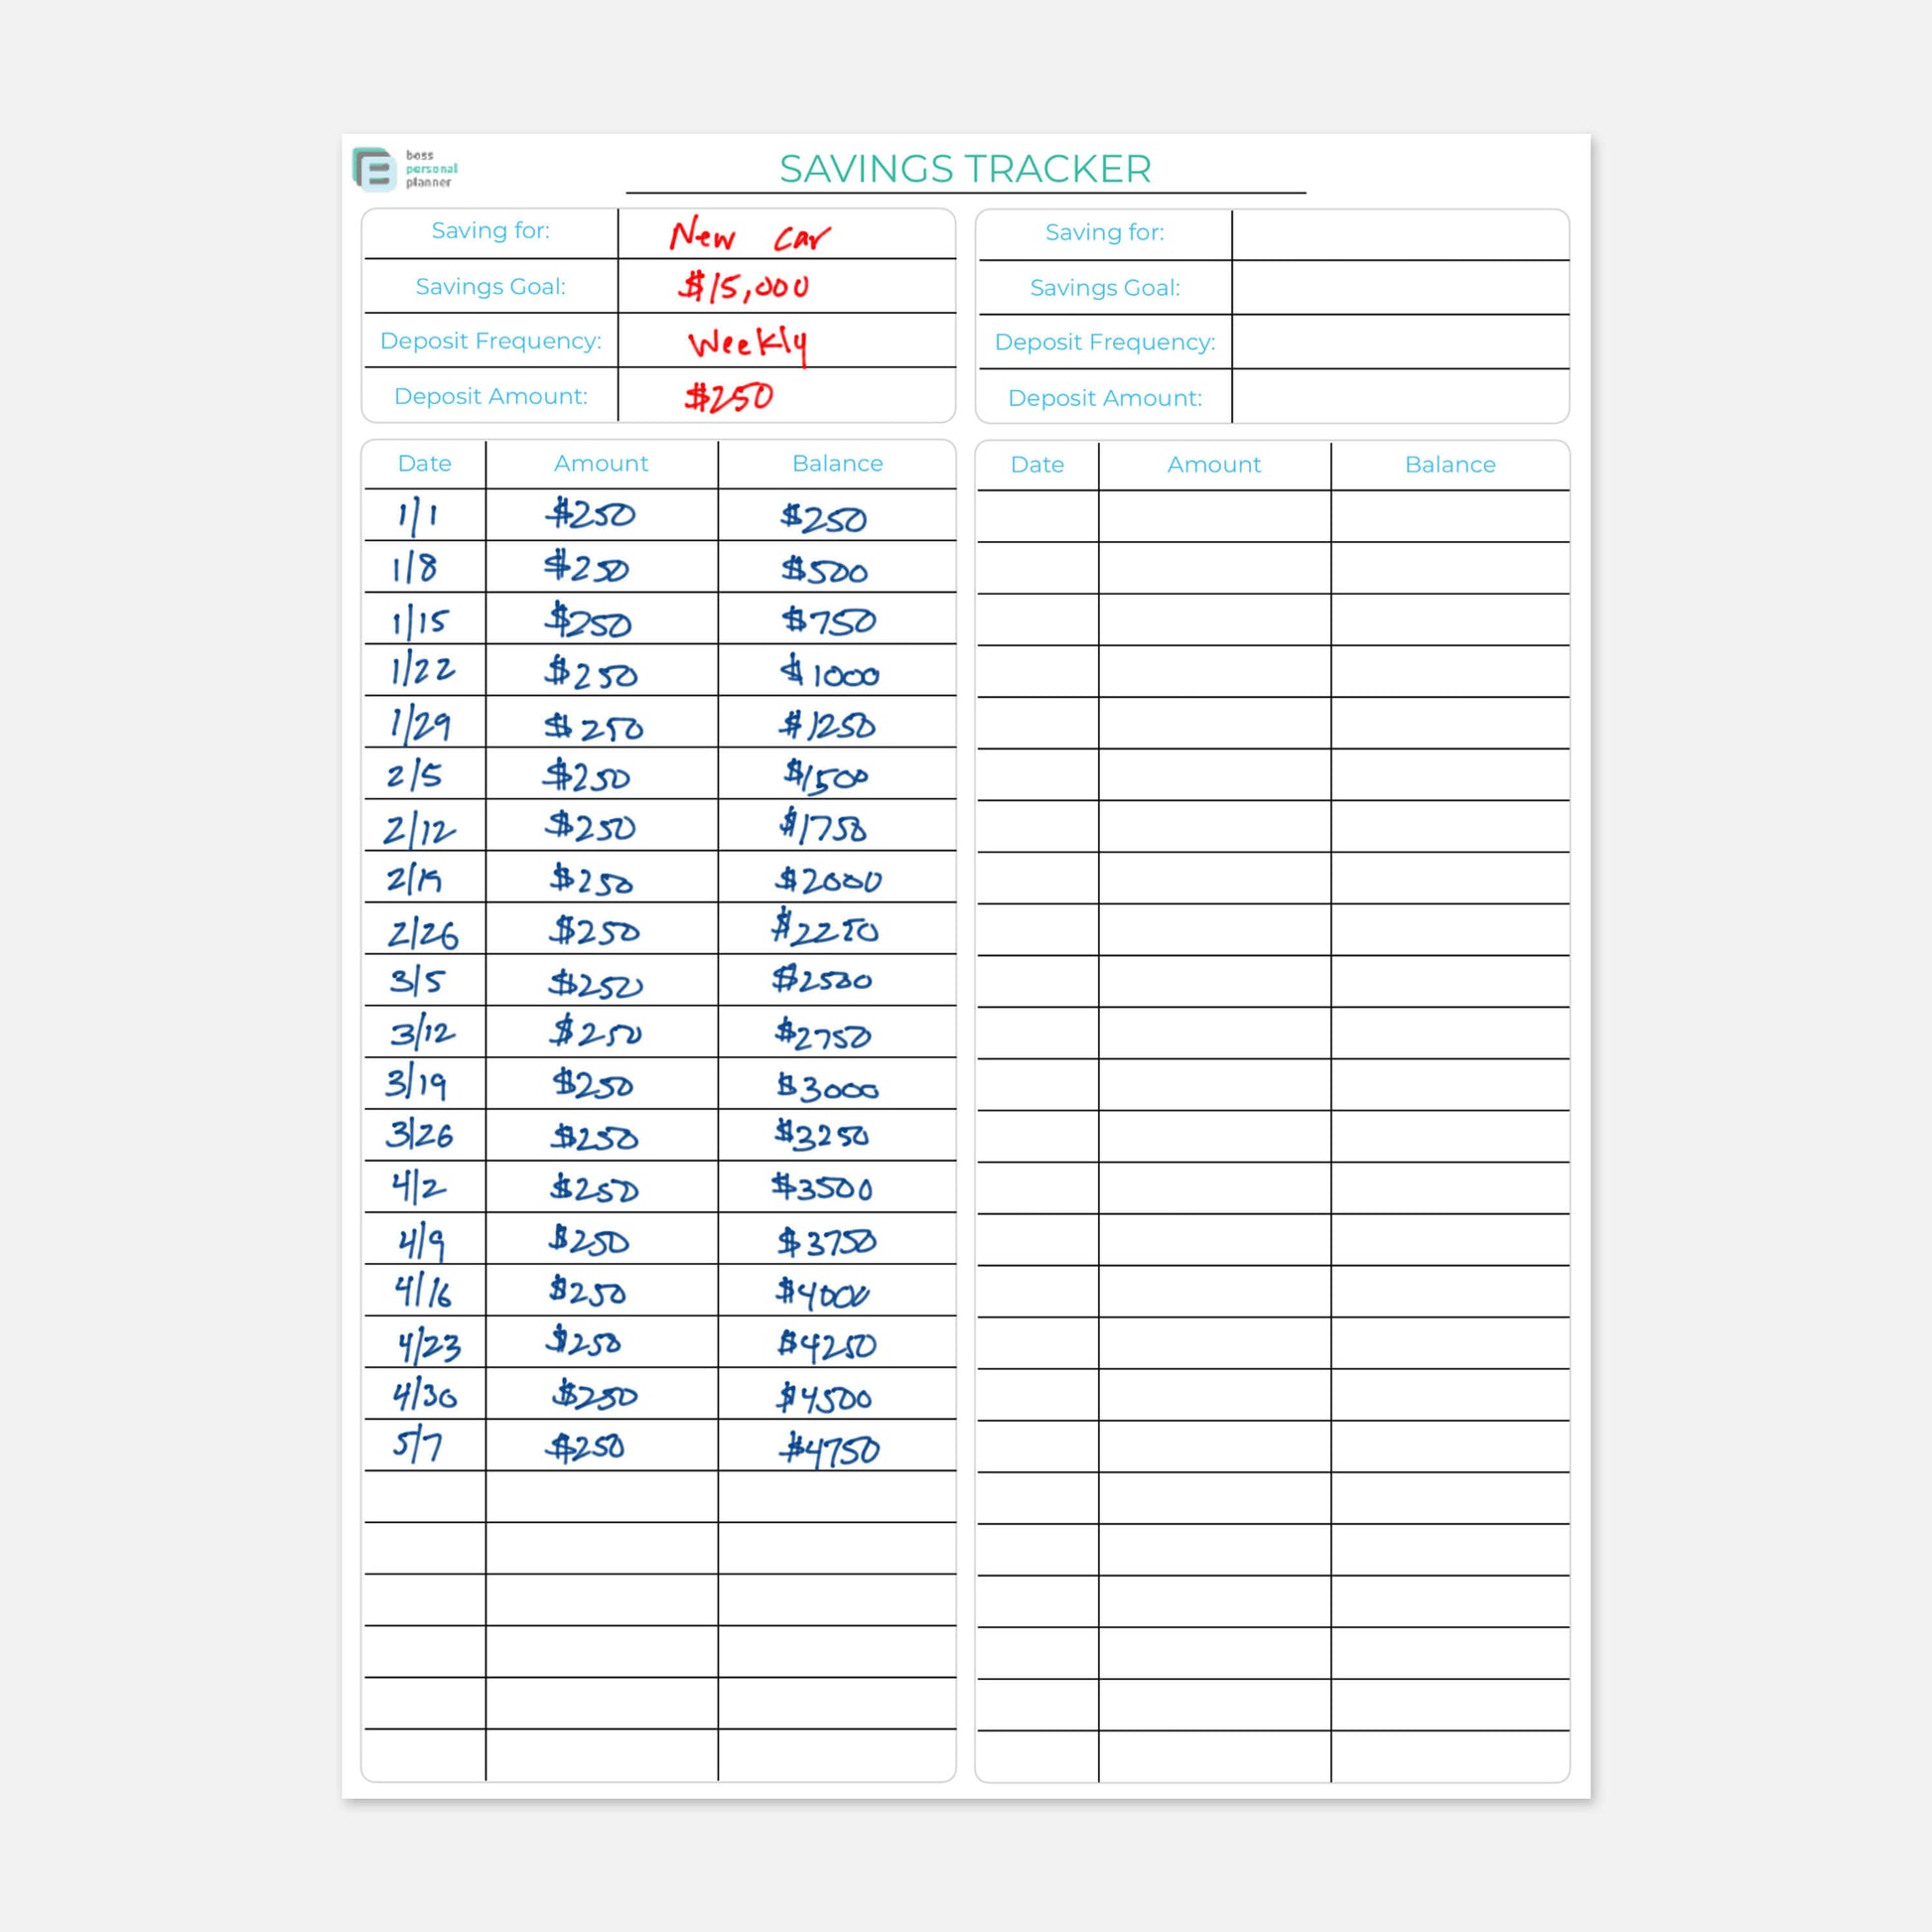 Printable Budget Planner - Monthly Budget Template & Expense